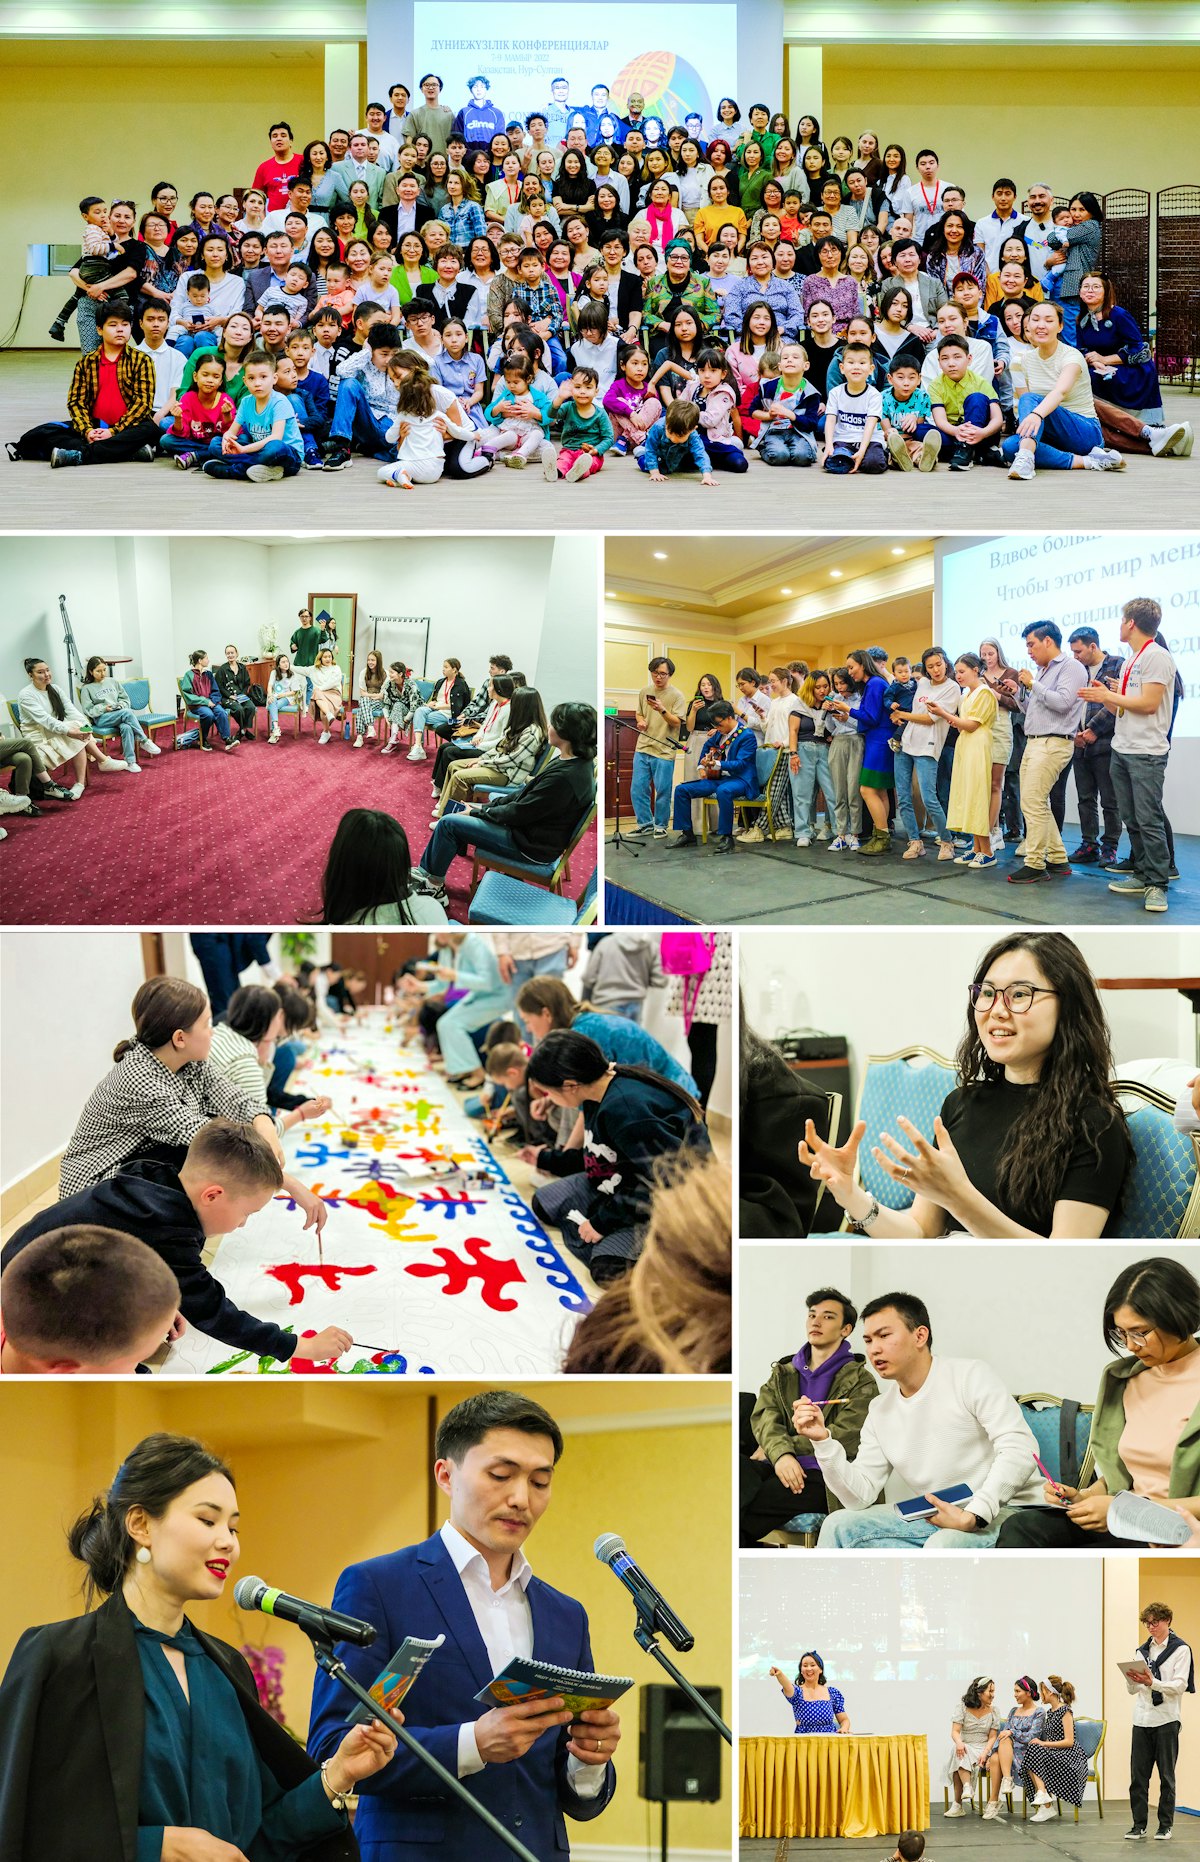 This conference in Nur-Sultan, Kazakhstan, featured artistic expressions, and presentations on the various Bahá’í community-building activities that are building capacity for service to society.